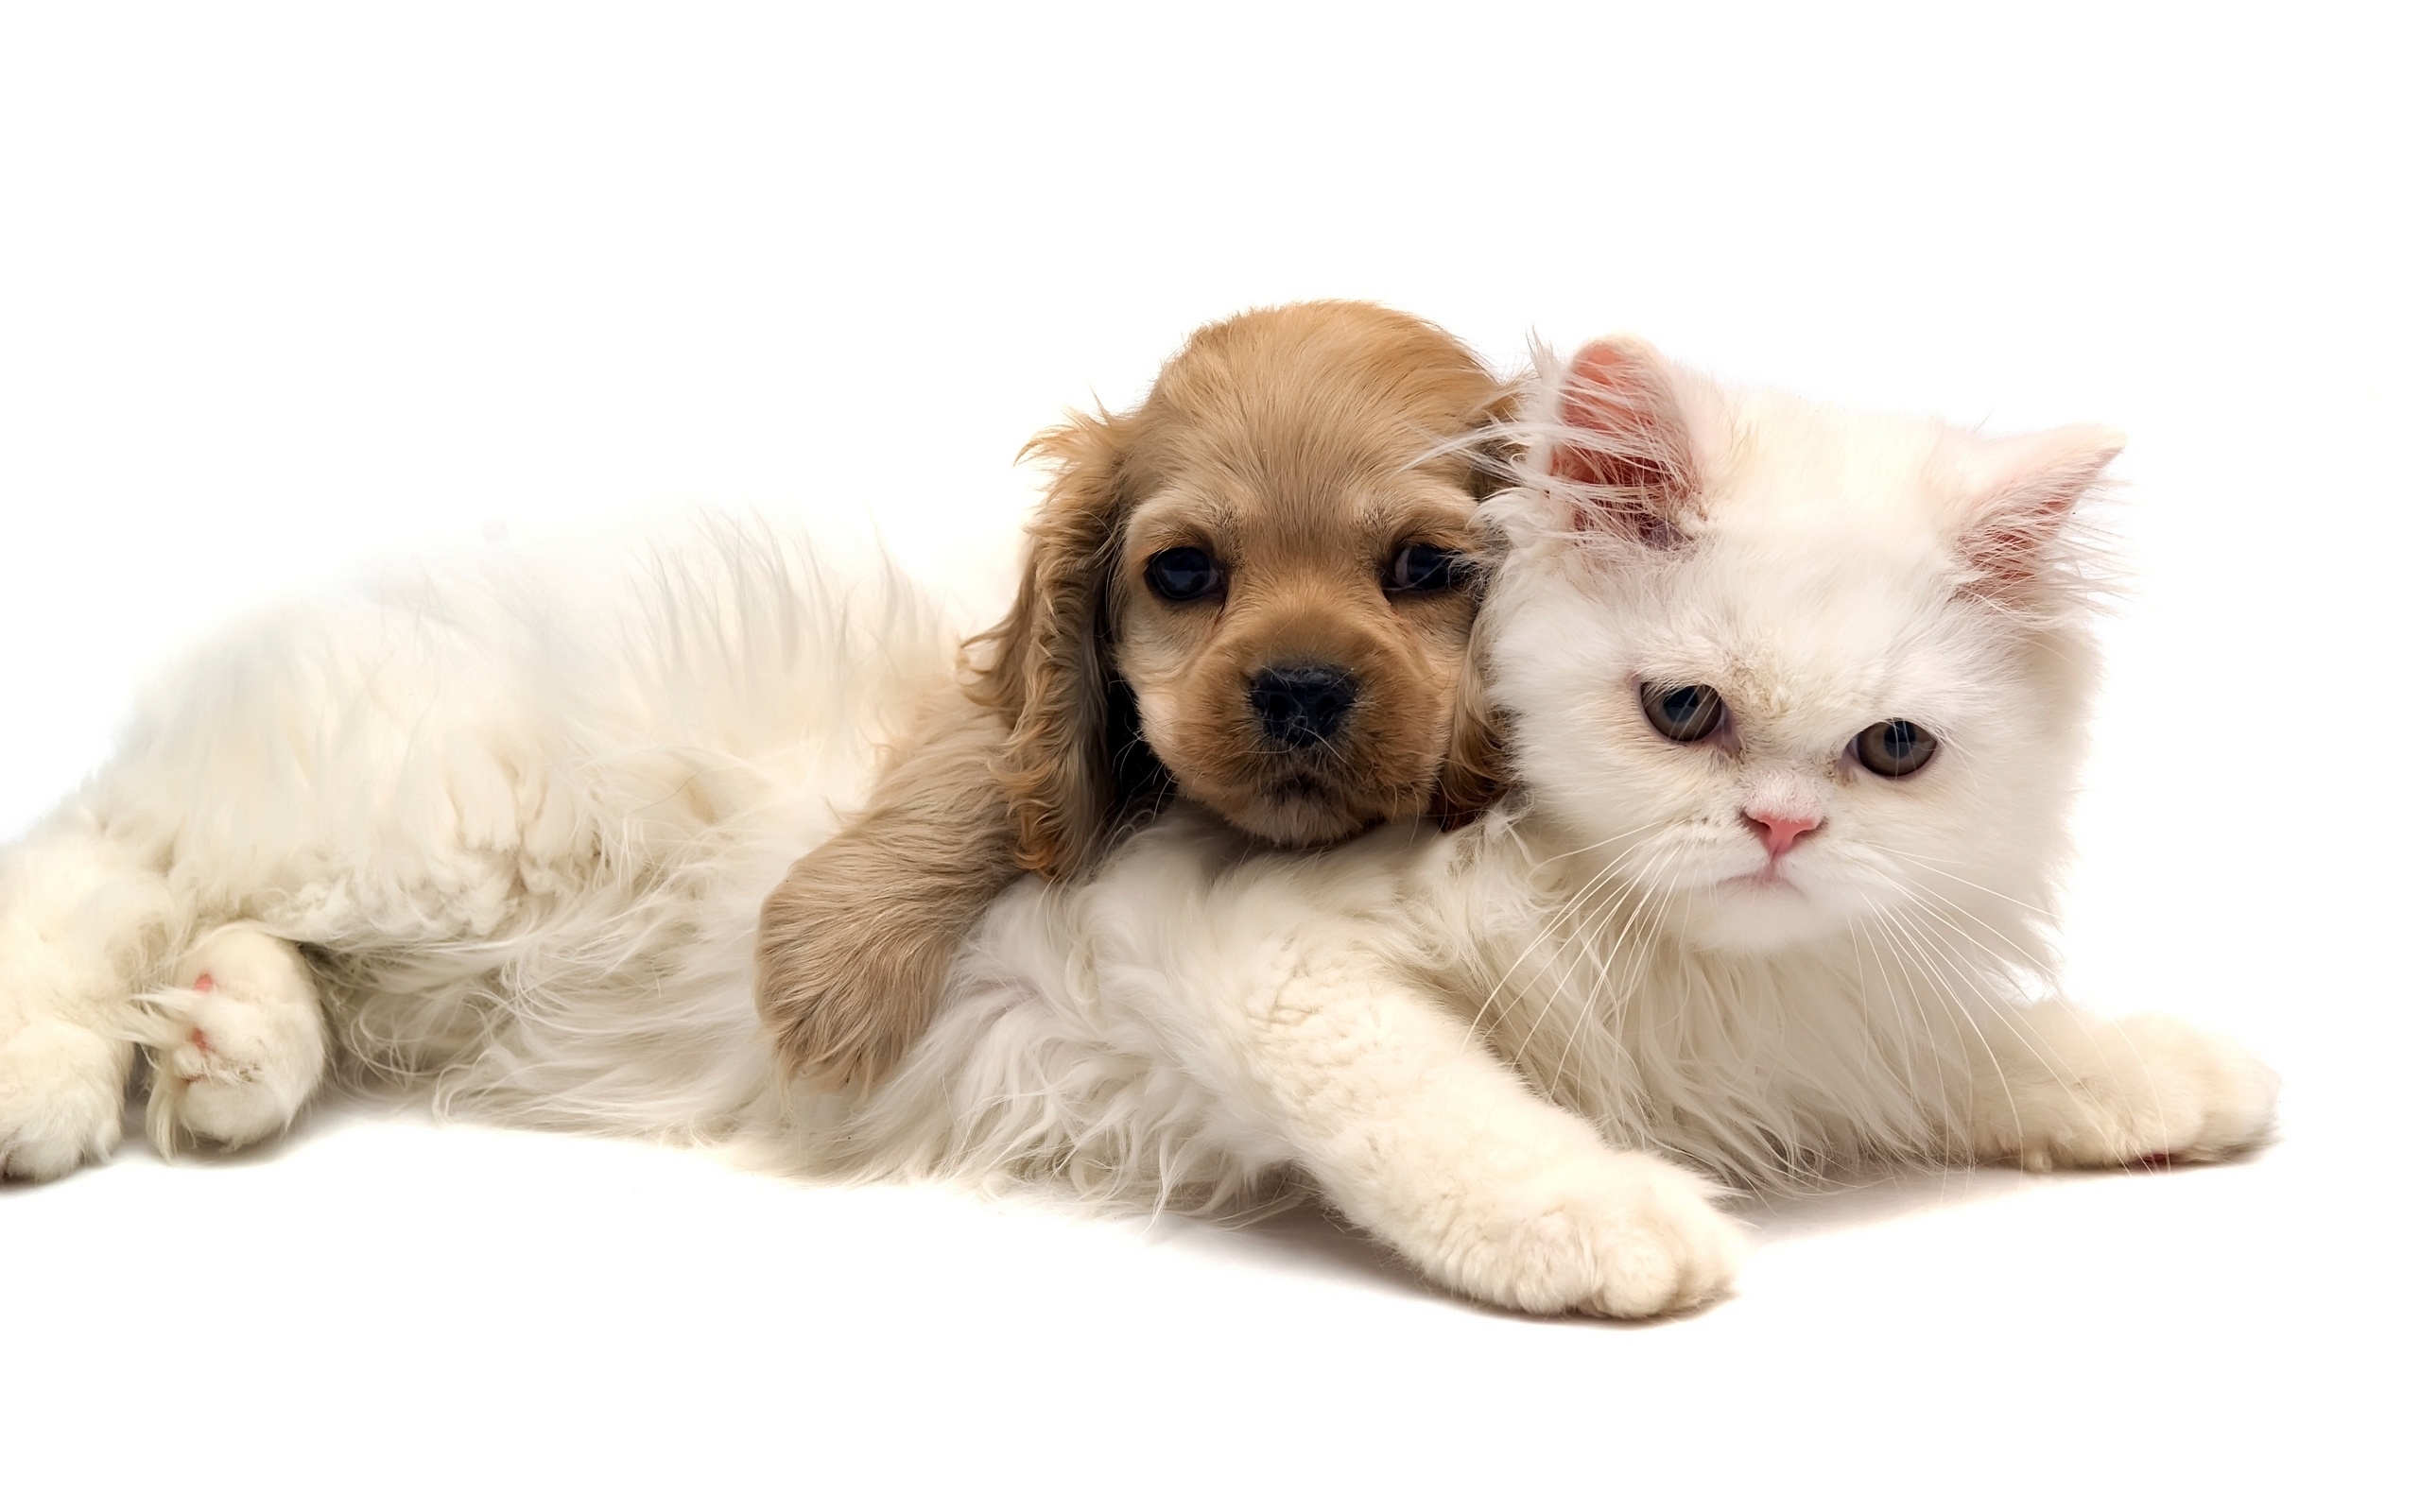 Cat and dog wallpapers and images  wallpapers, pictures, photos